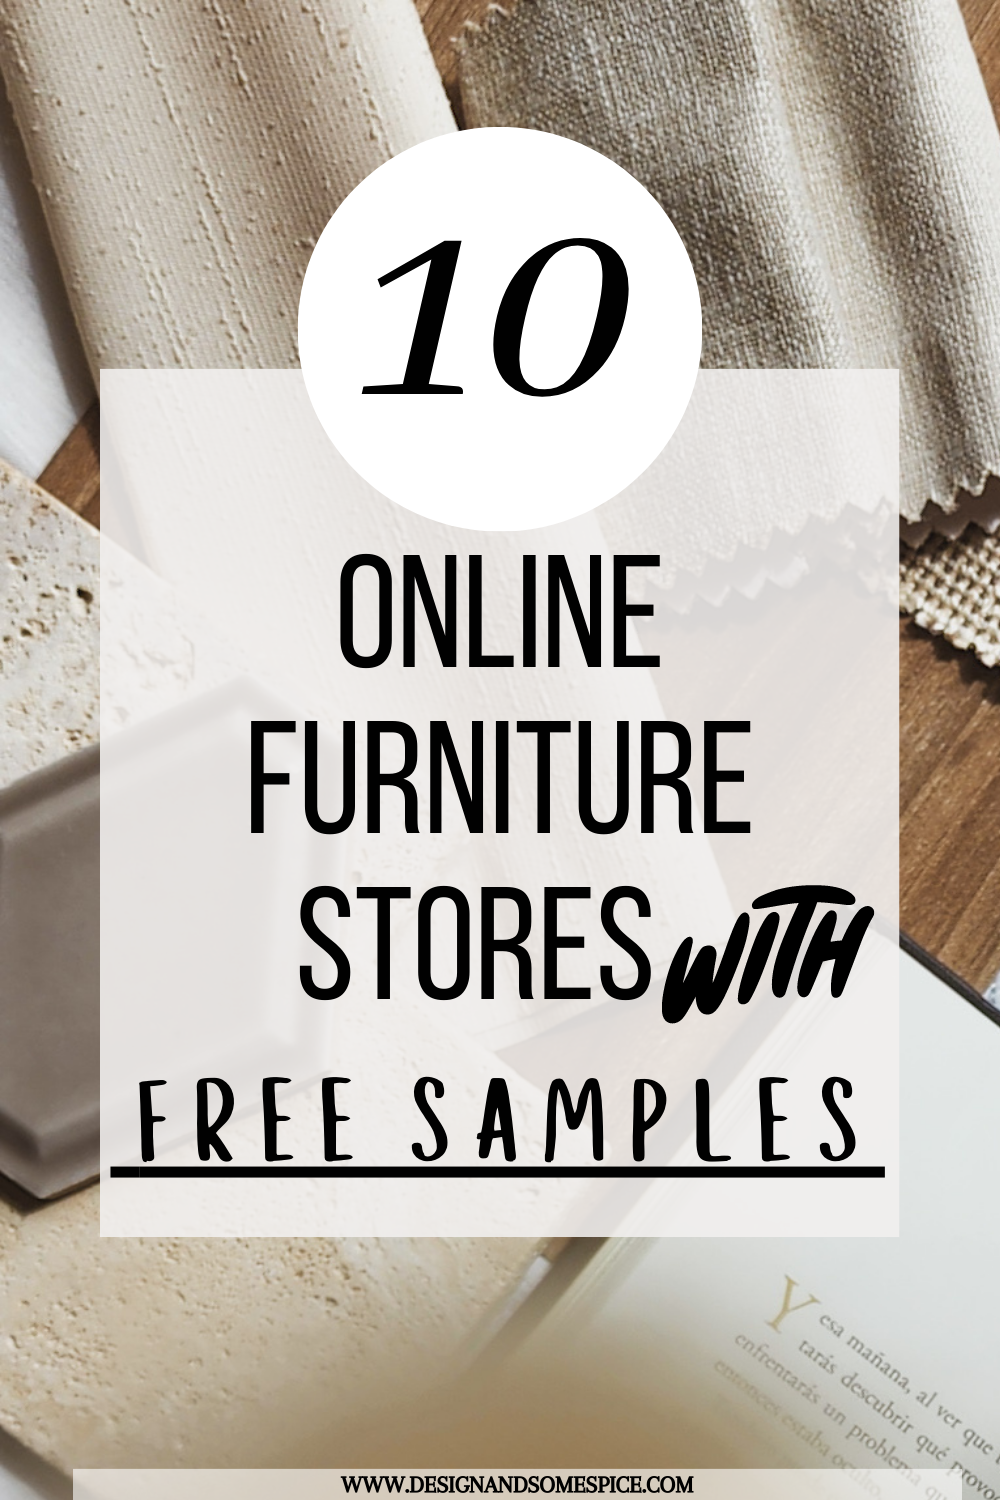 Discover furniture with free samples